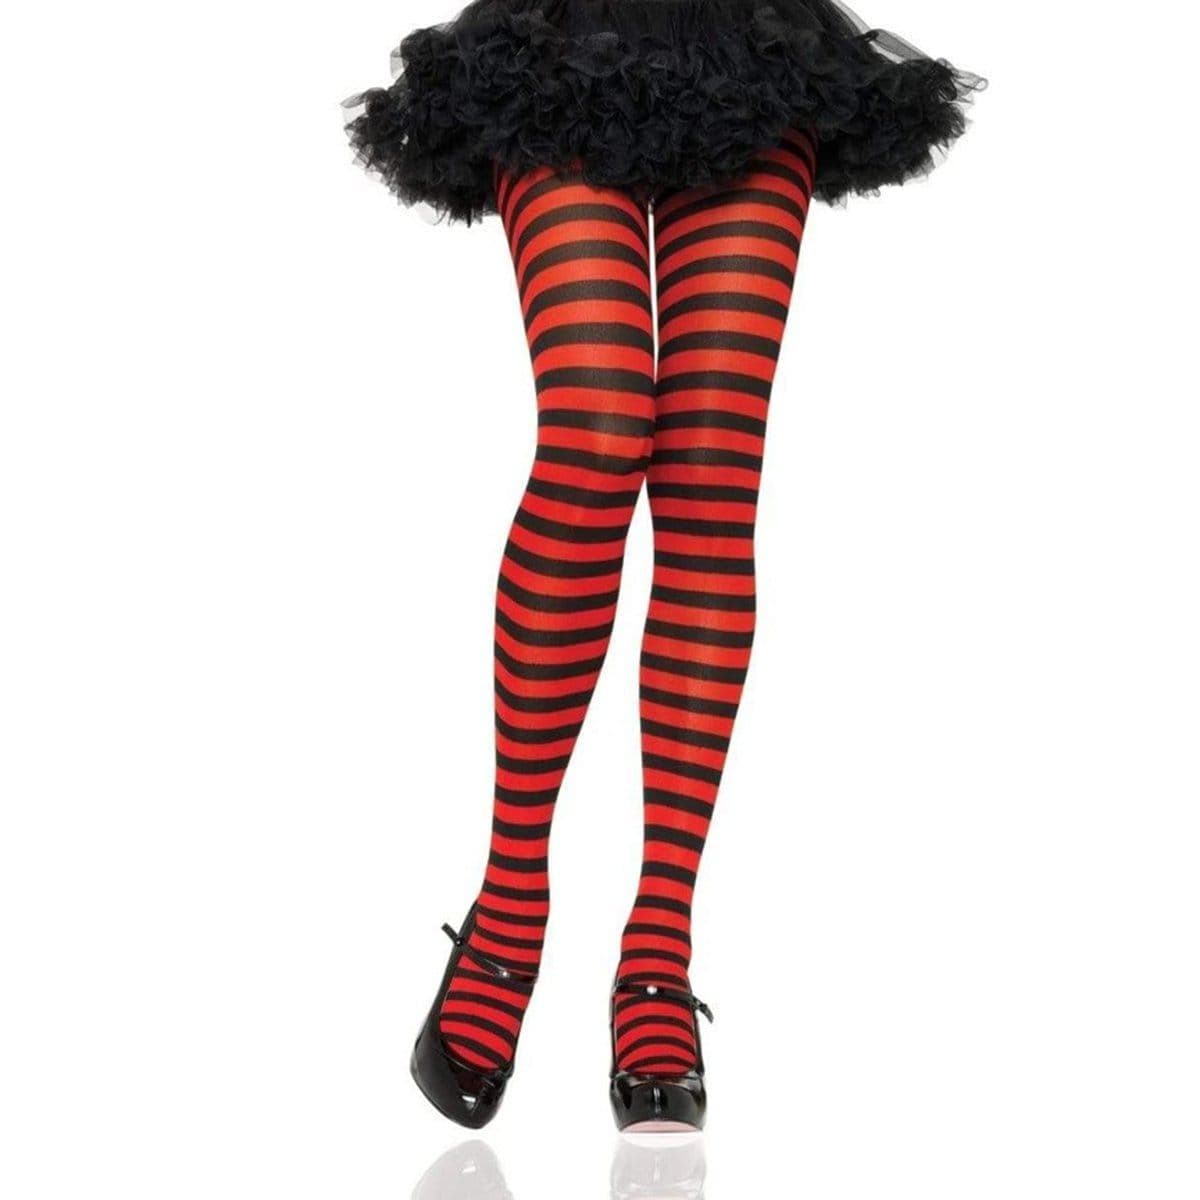 Buy Costume Accessories Black & red striped nylon tights for women sold at Party Expert